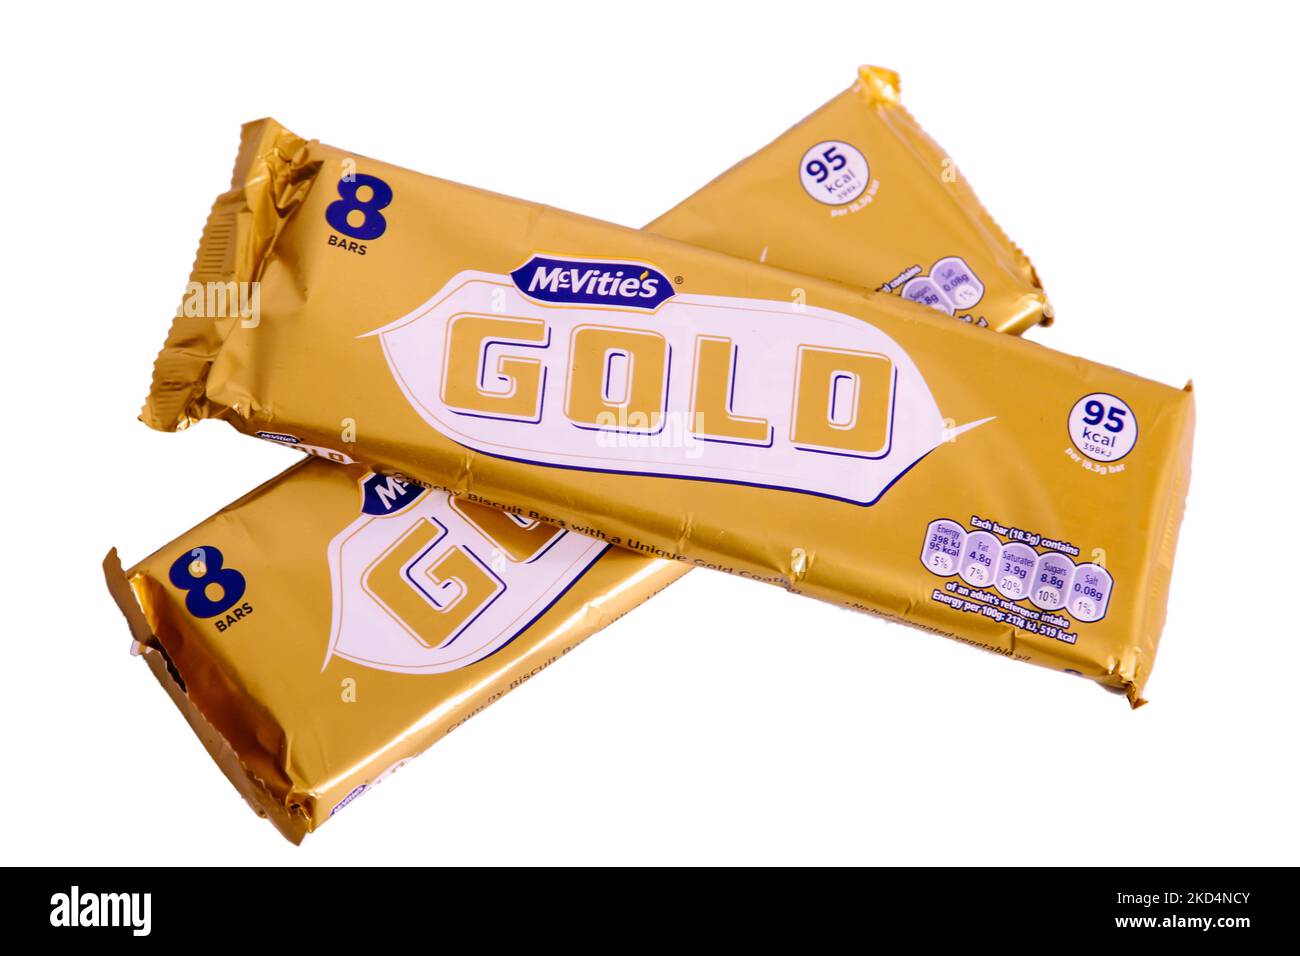 McVities Gold Bars - 2 multipack of 8 bars of golden chocolate bar snack treat Stock Photo